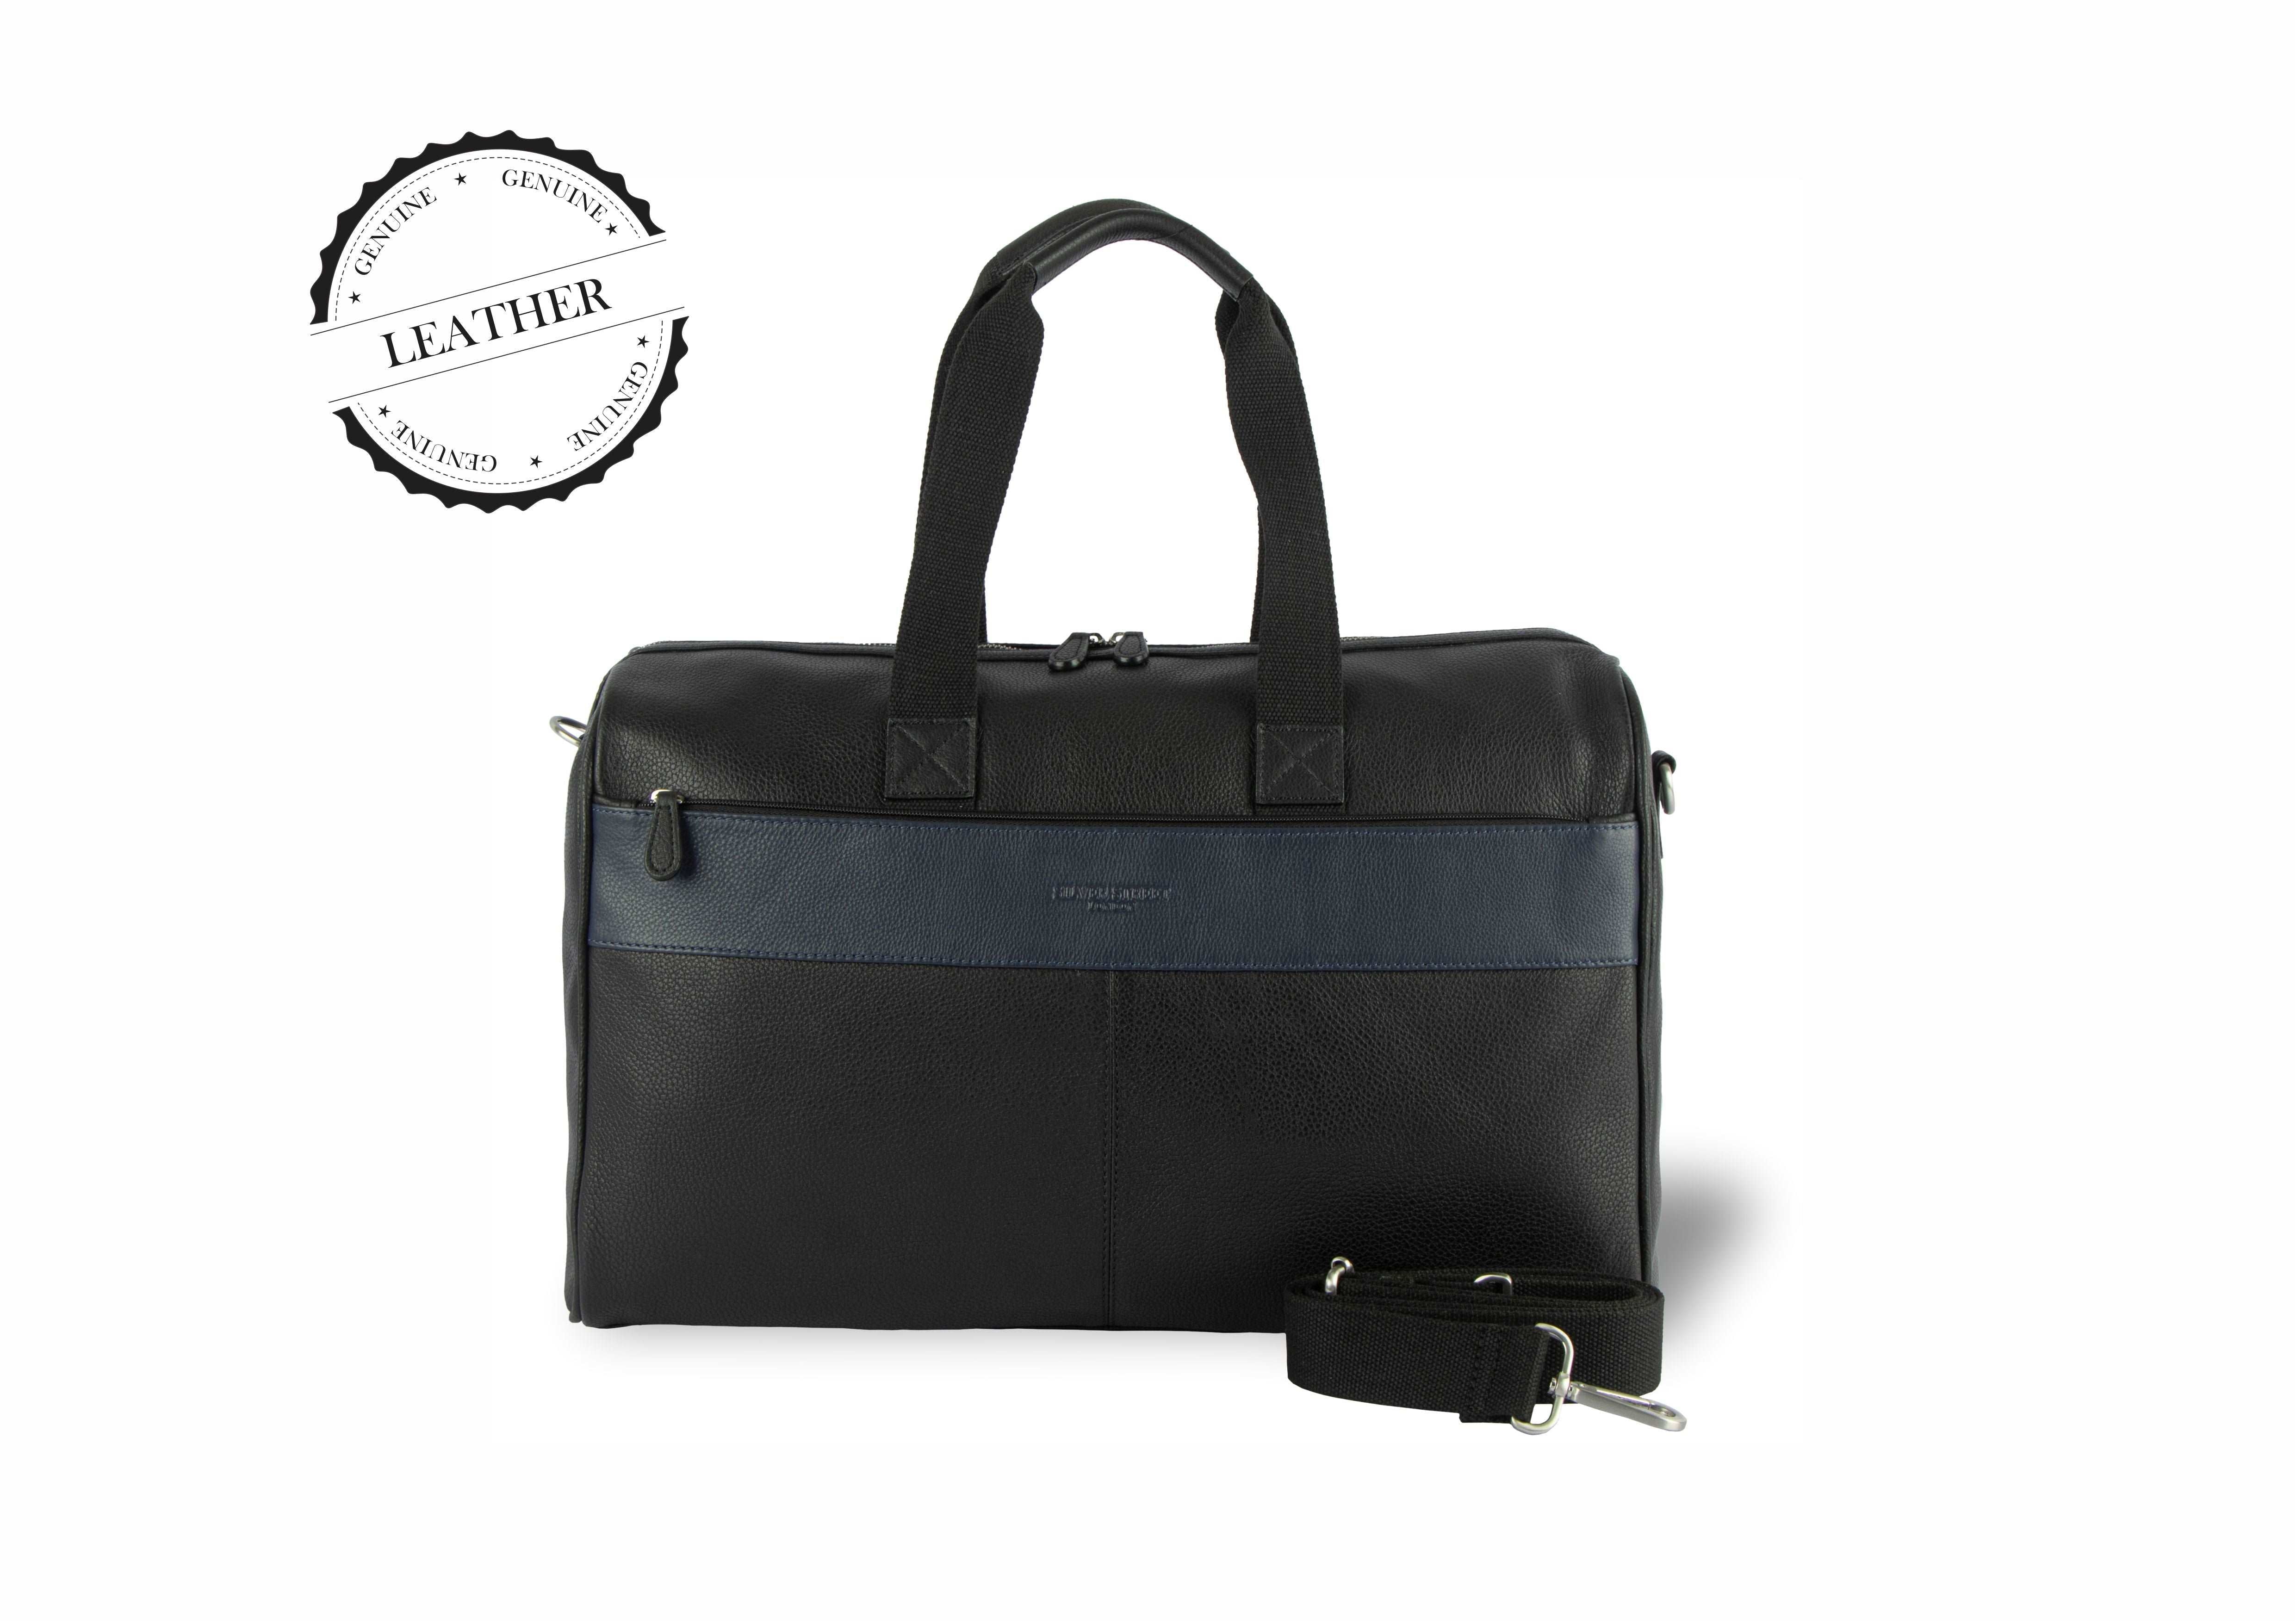 Walter Leather Holdall